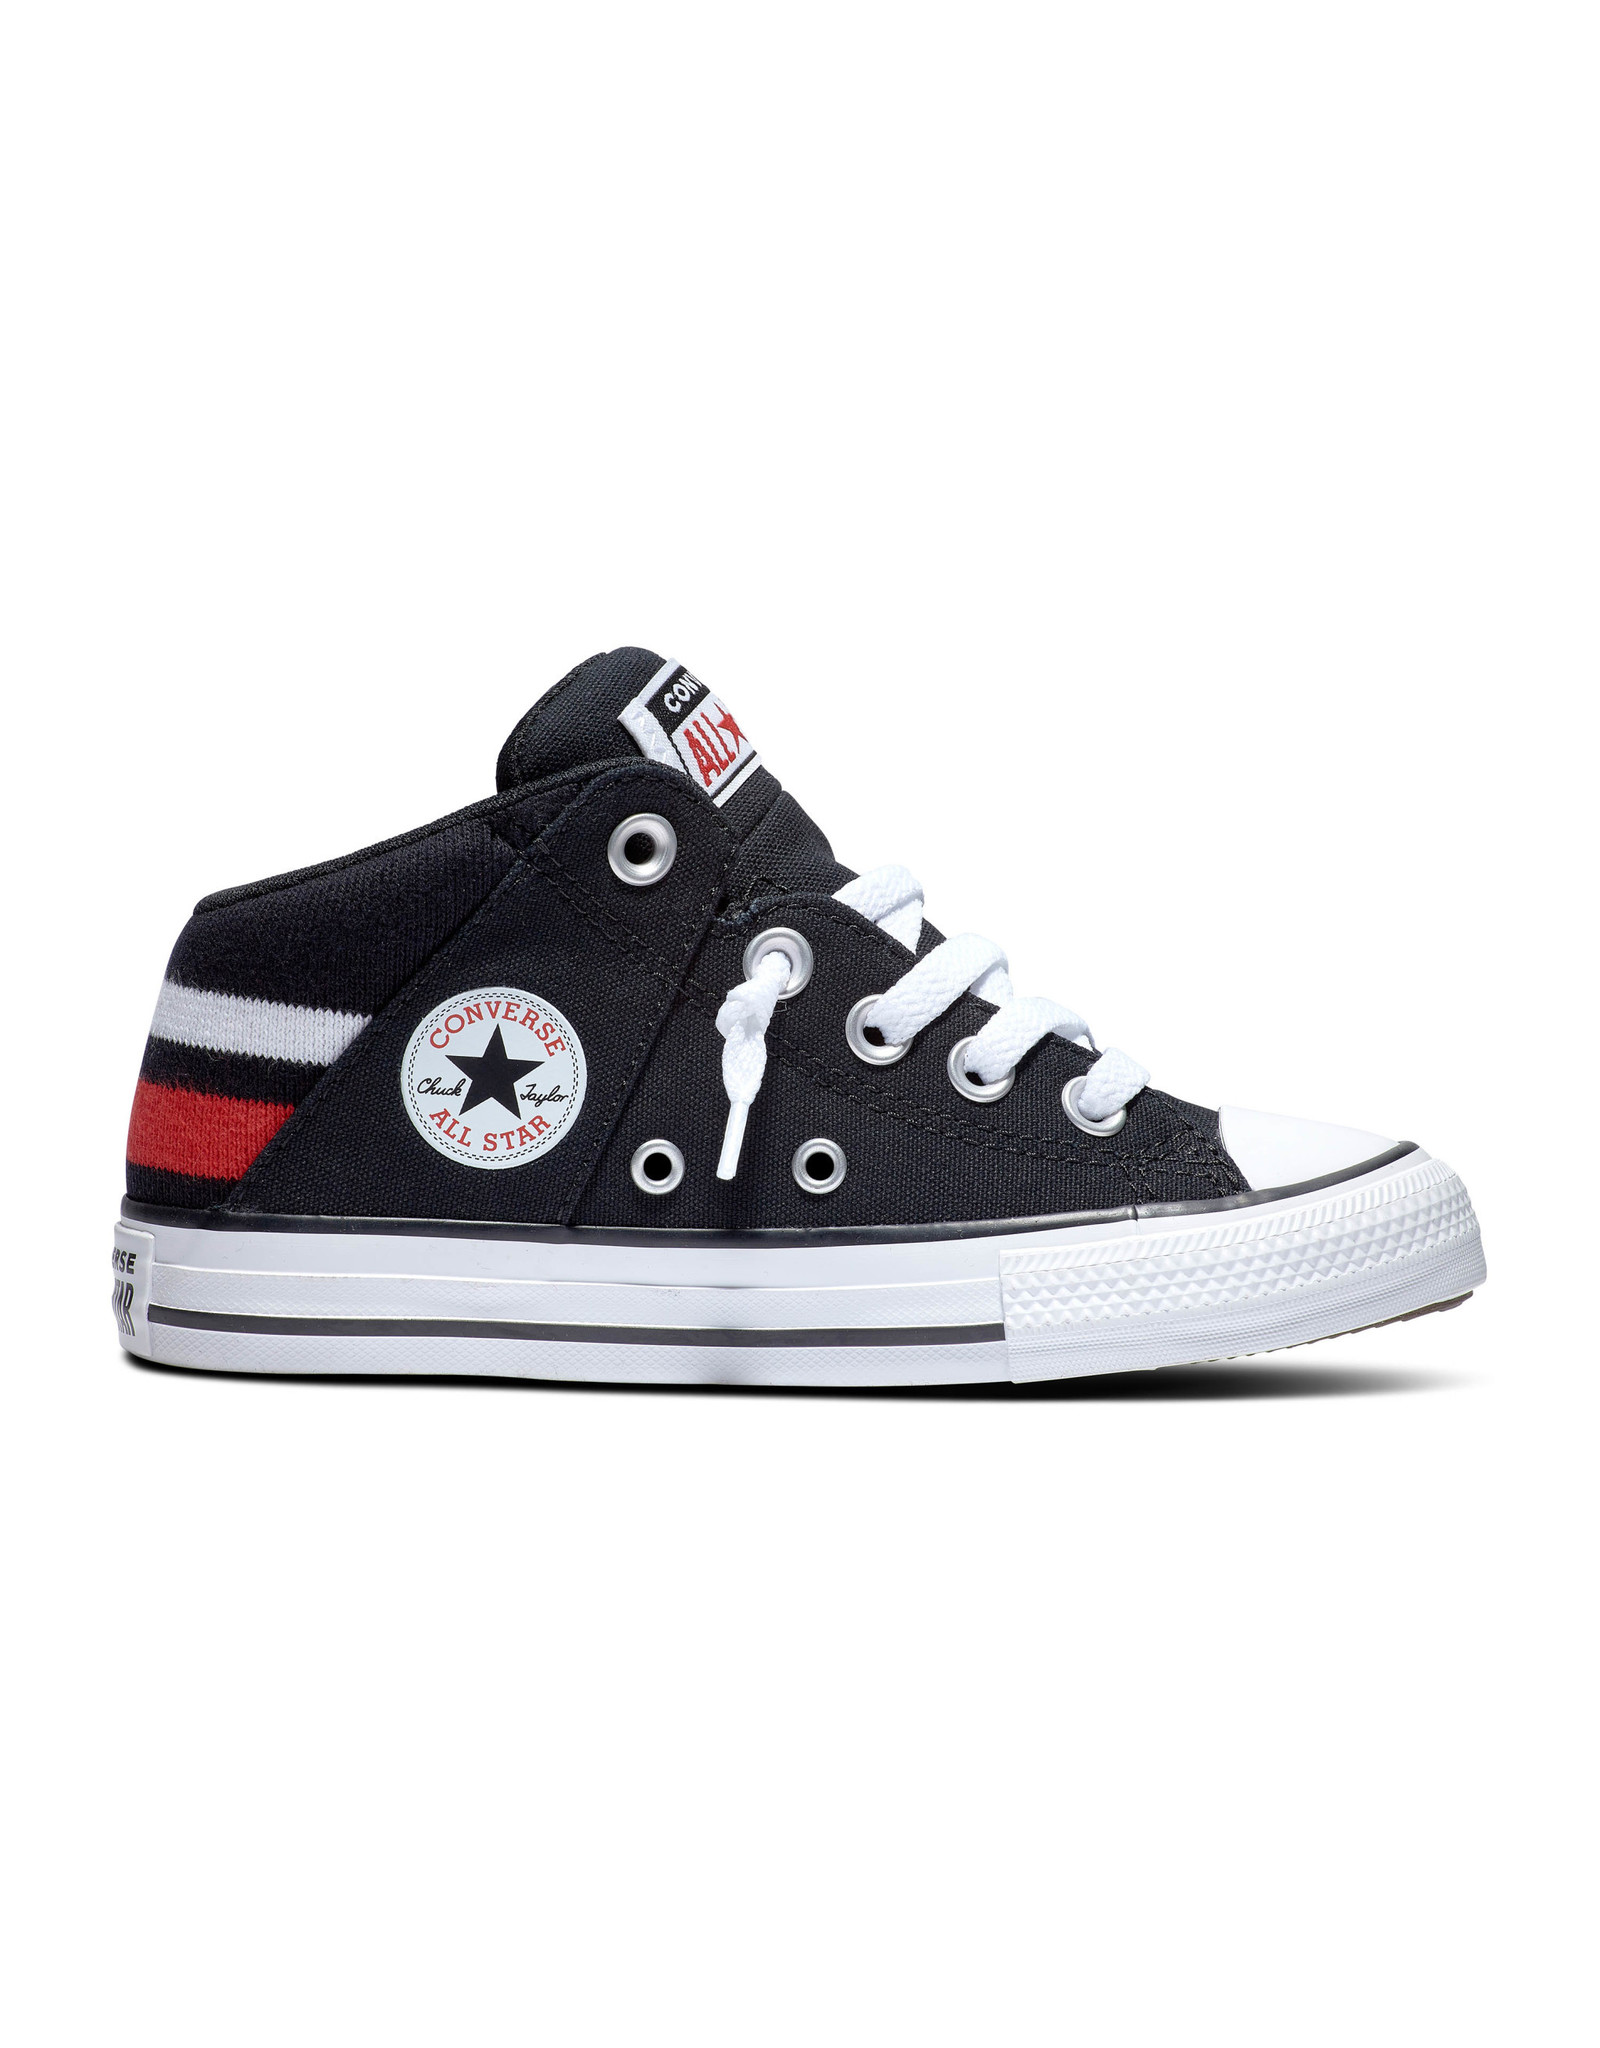 CHUCK TAYLOR AXEL MID BLACK/WHITE/RED CEMAB - A03834C